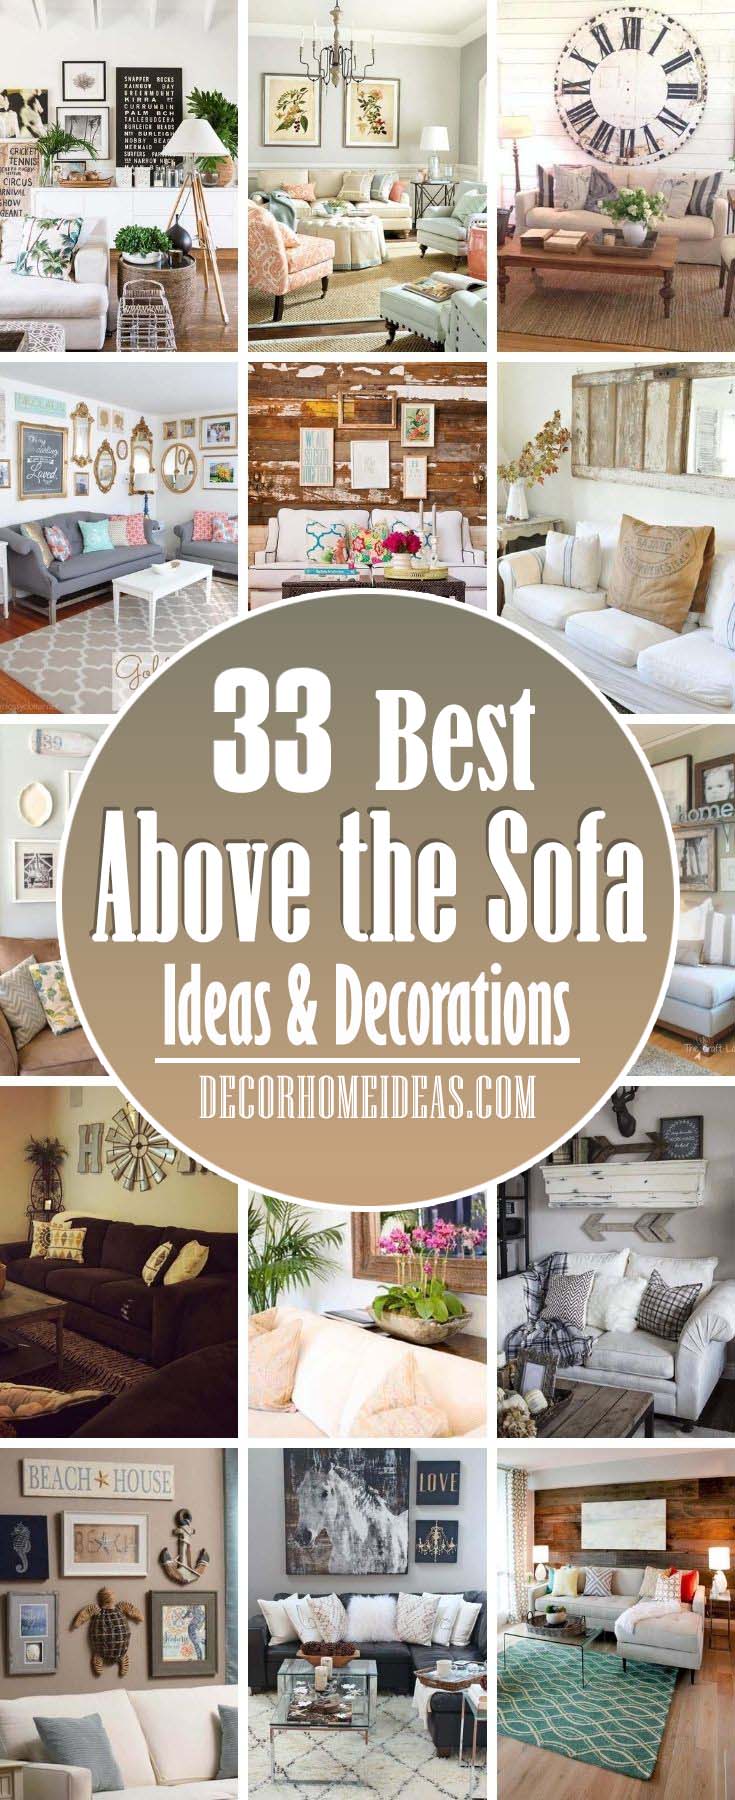 Best Ideas To Decorate Above The Sofa. The wall space above your sofa is brimming with design potential, from art arrangements to storage shelves, it just takes a little imagination. #decorhomeideas